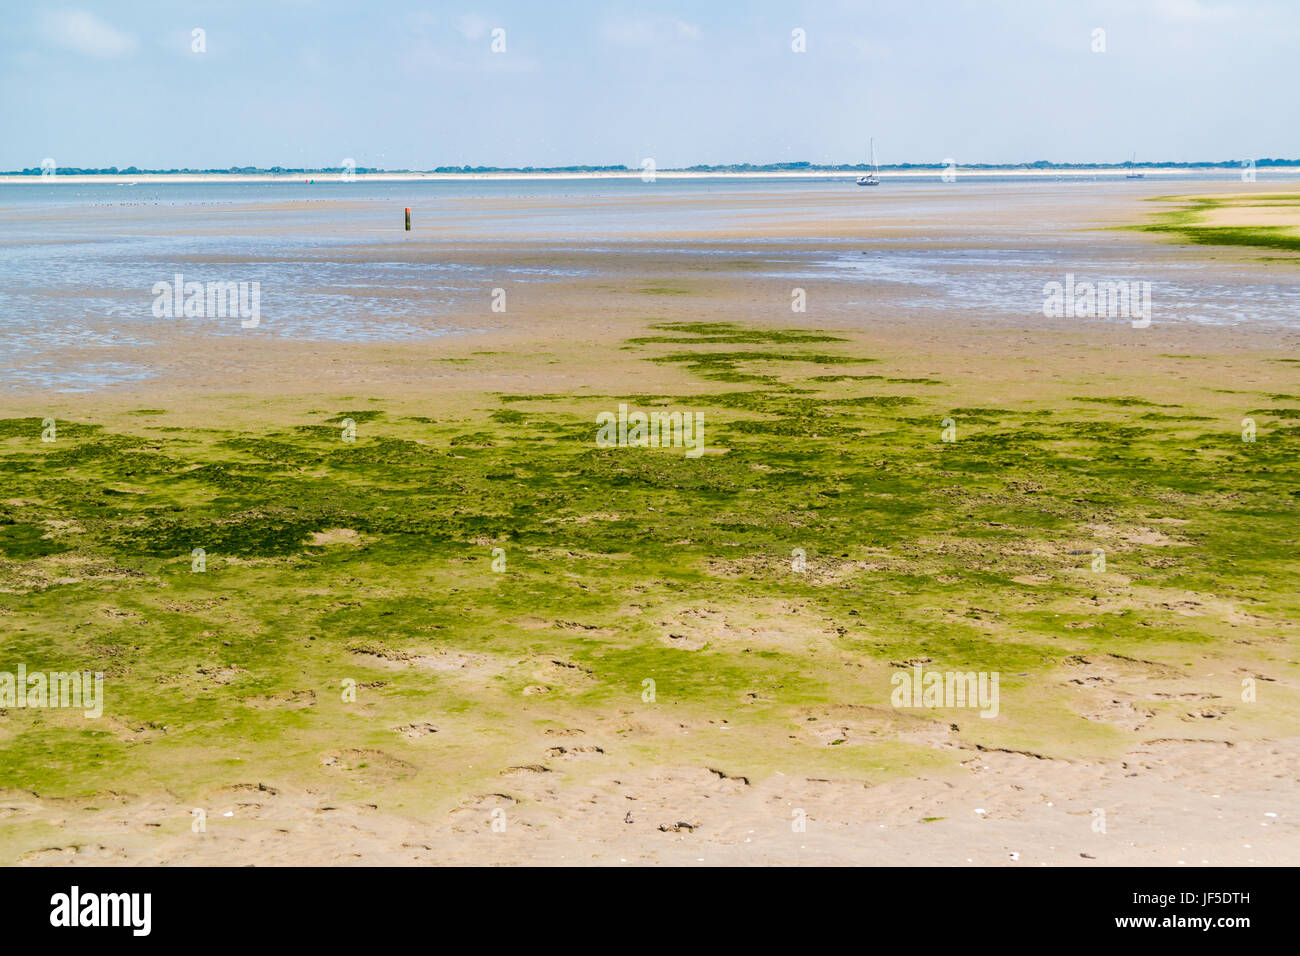 Panorama of sandflat and mudflat landscape at low tide, nature reserve near Maasvlakte and port of Rotterdam, Netherlands Stock Photo